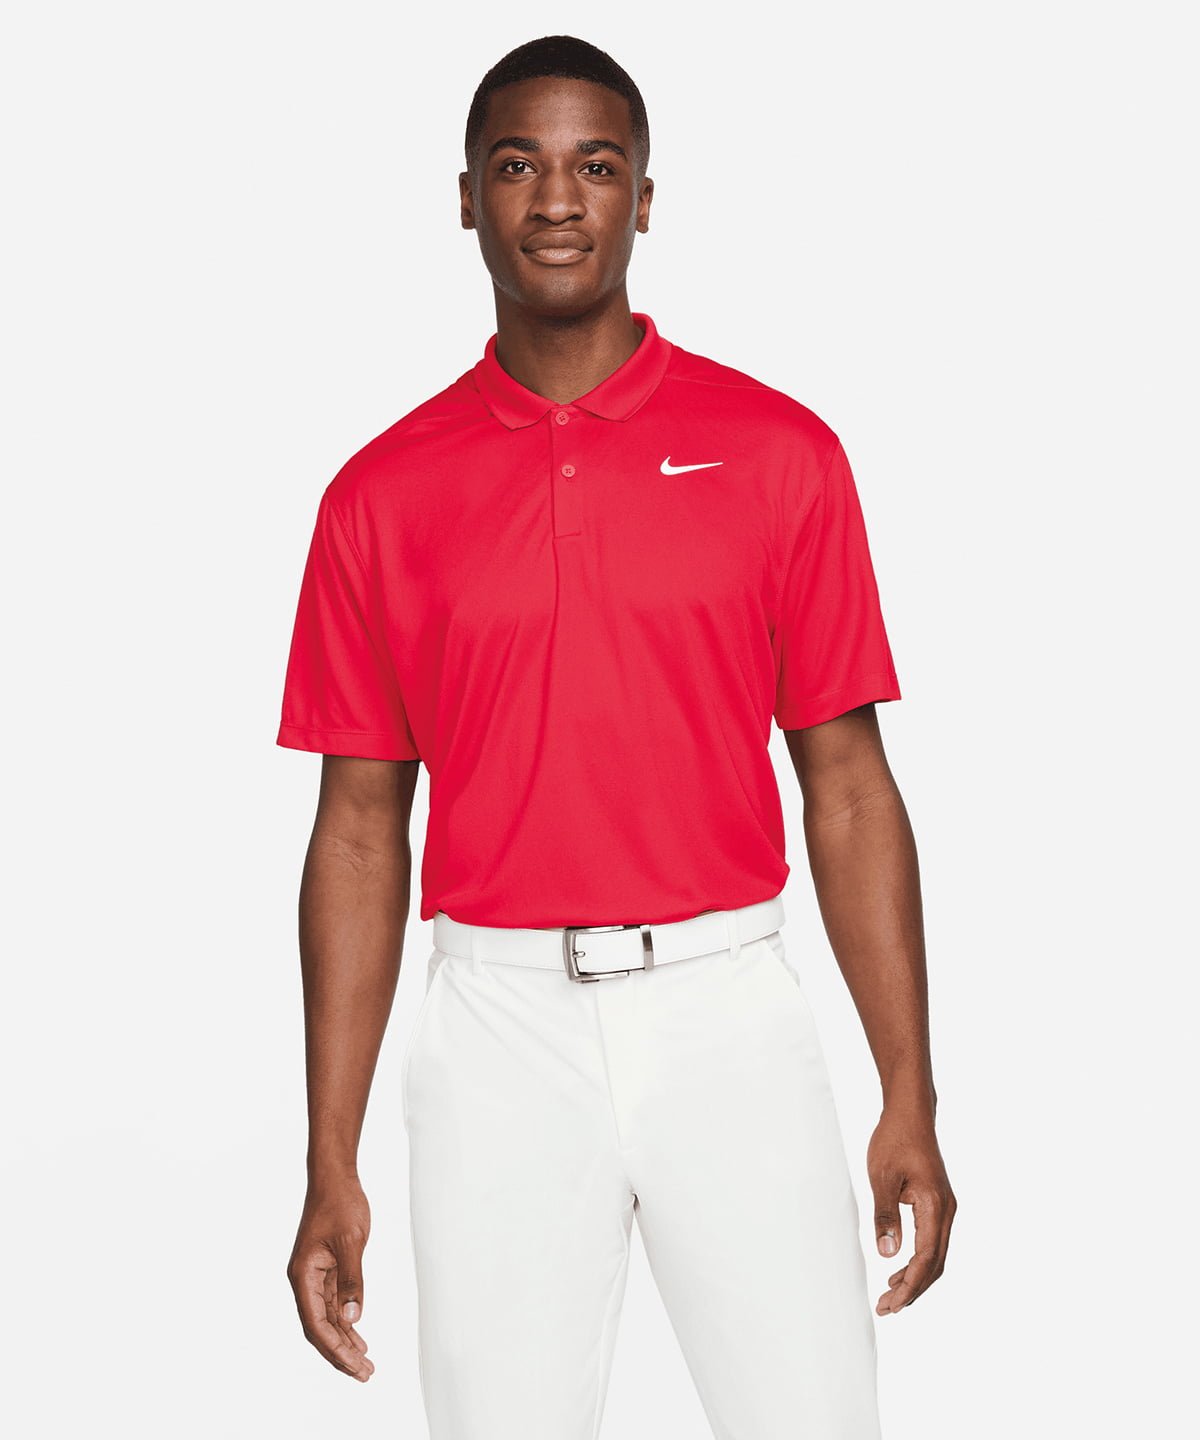 Nike Dri-FIT victory solid golf polo University University Red - The ...